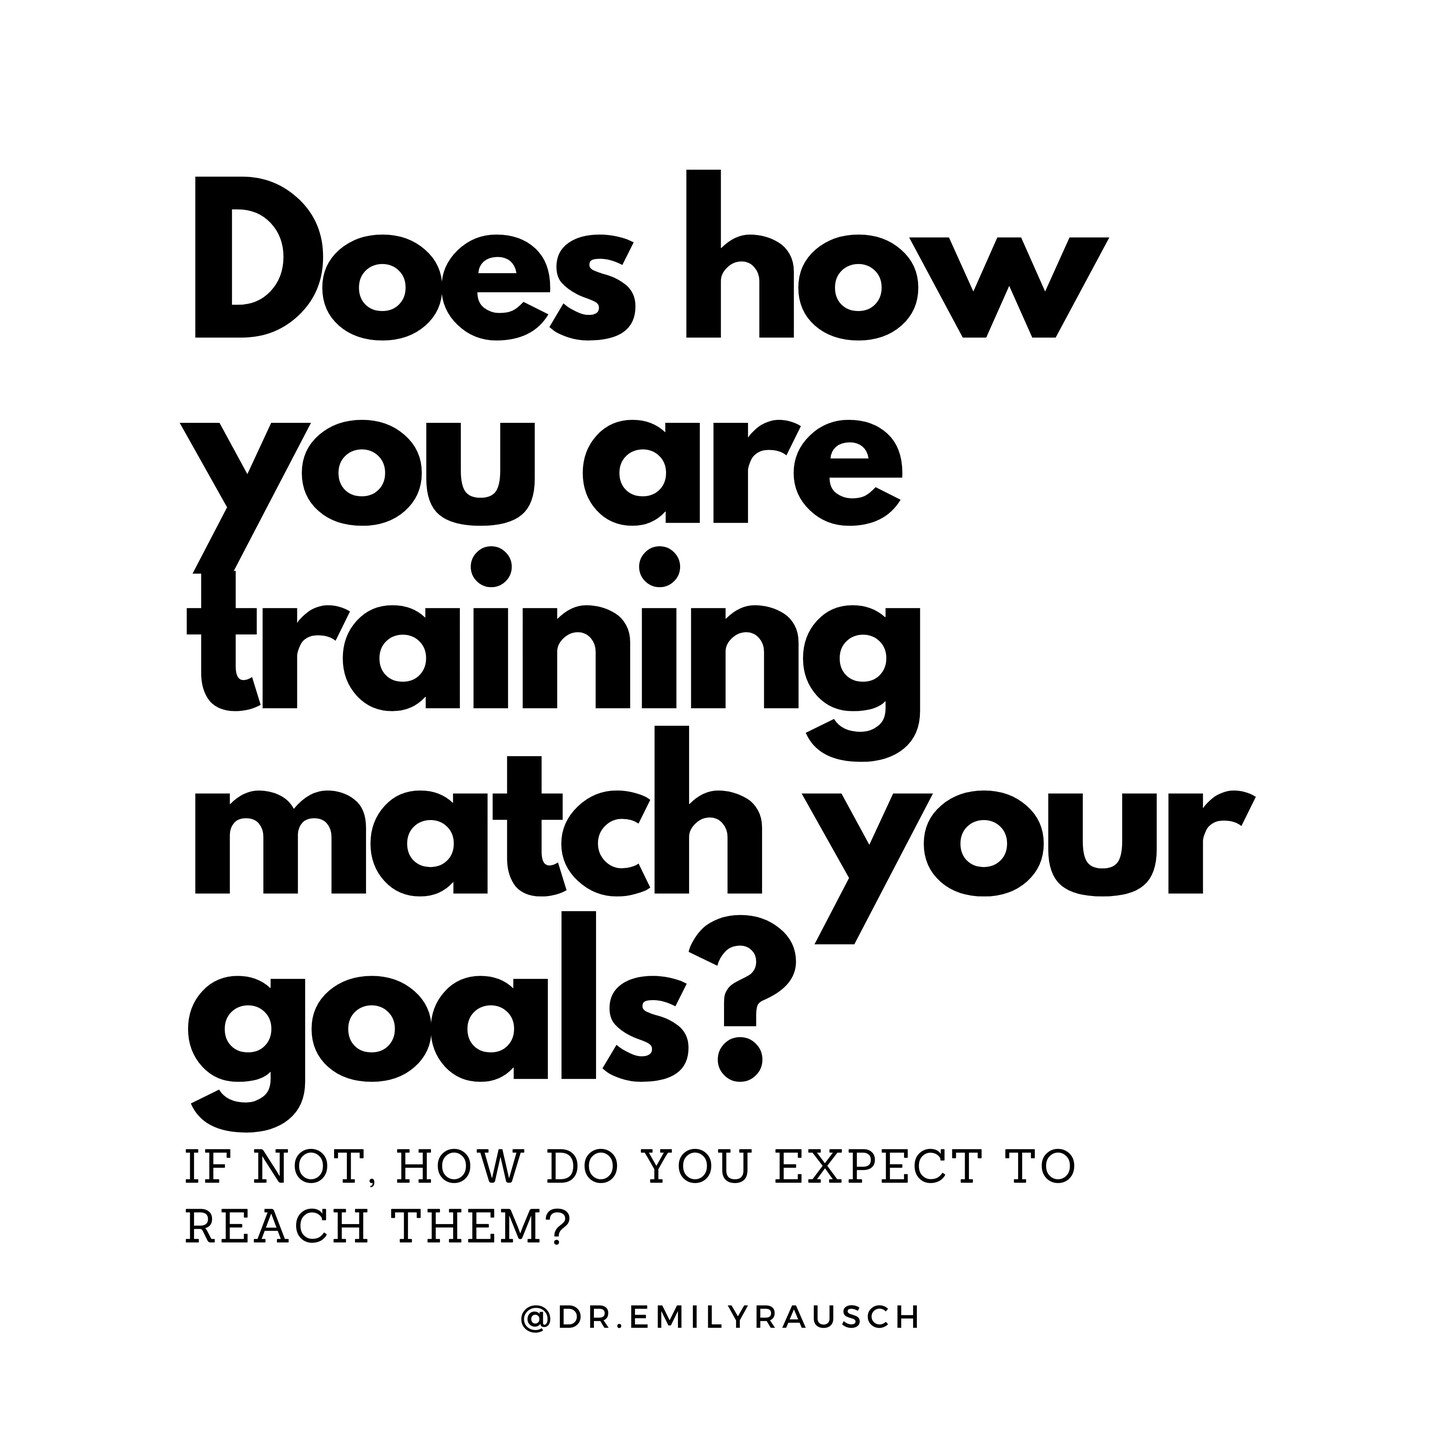 If you&rsquo;ve found yourself getting frustrated by your lack of progress, I ask you this:

If I reviewed your goal list and your current training program, would they be in alignment?

You get what you train. 

If your goal is to be stronger - you n